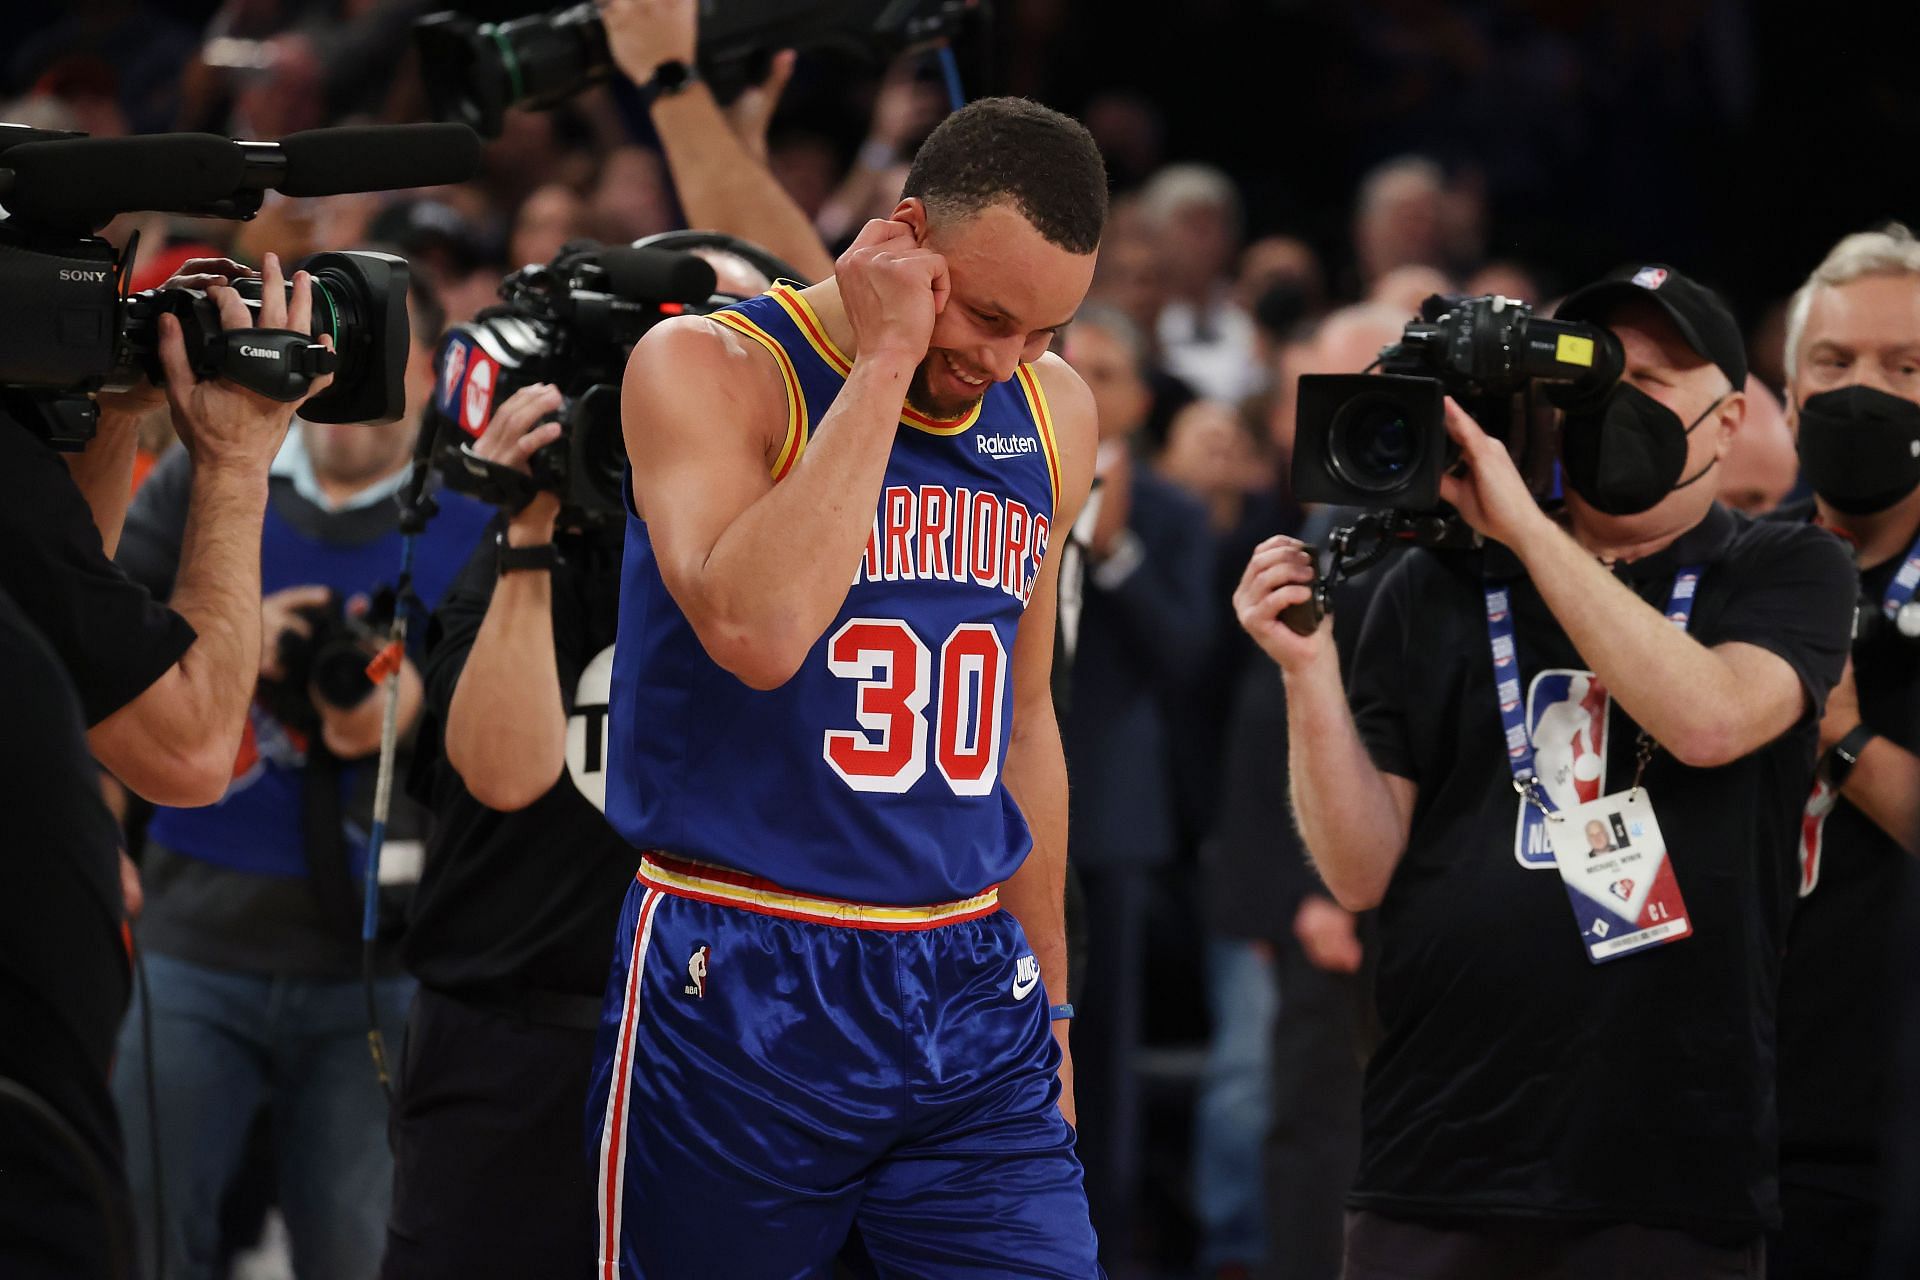 Golden State Warriors All-Star Stephen Curry reacts after breaking the 3-point record